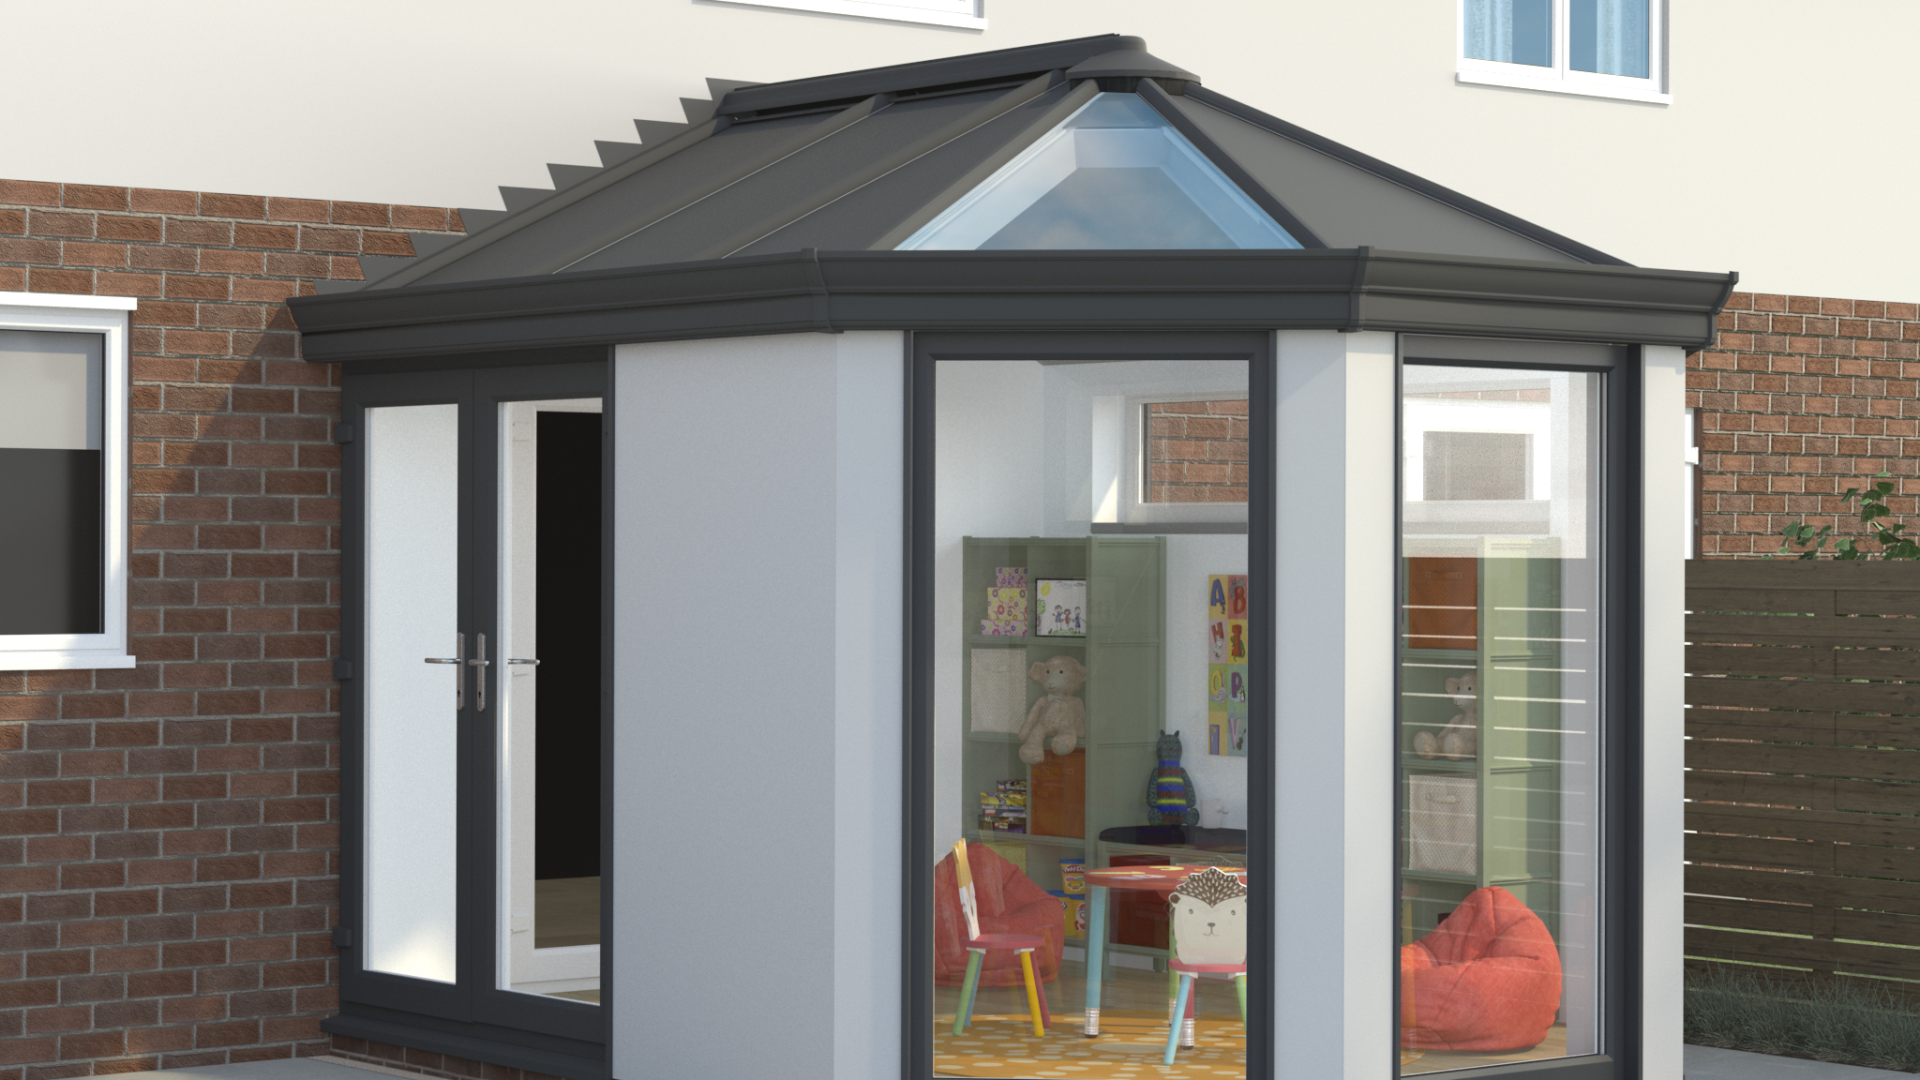 Virtual mock up of an Ultraframe hup! extension on the back of a house, featuring a play room interior.